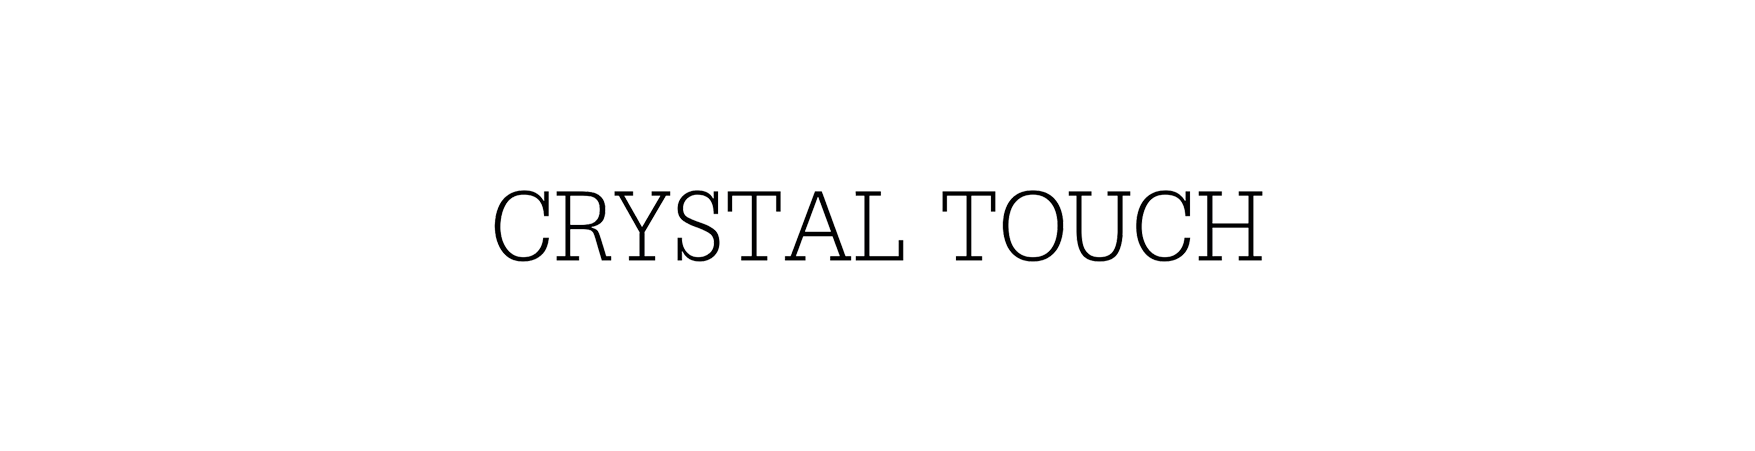 Crystal Touch